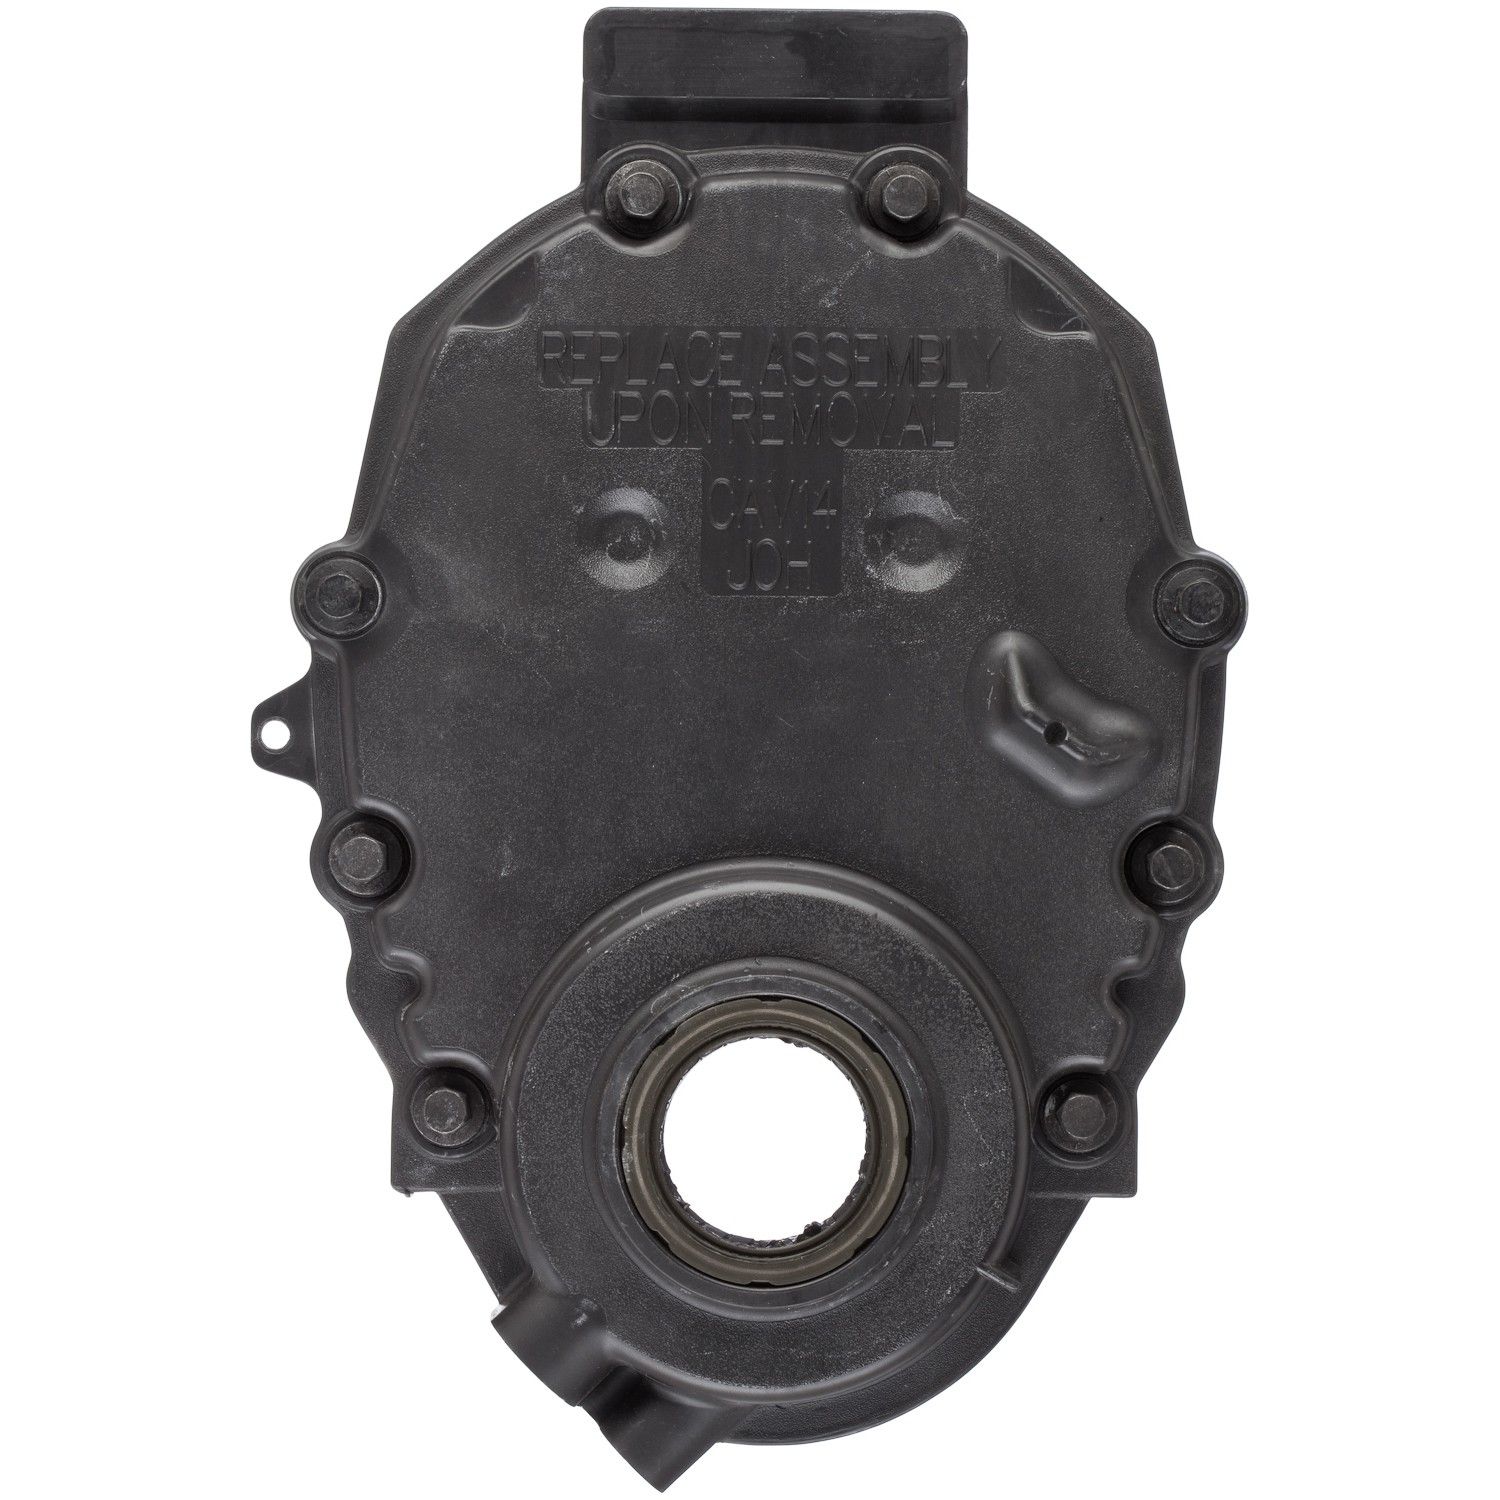 1995 - 2000 Chevrolet Tahoe Engine Timing Cover 8 Cyl 5.7L ATP 103076)